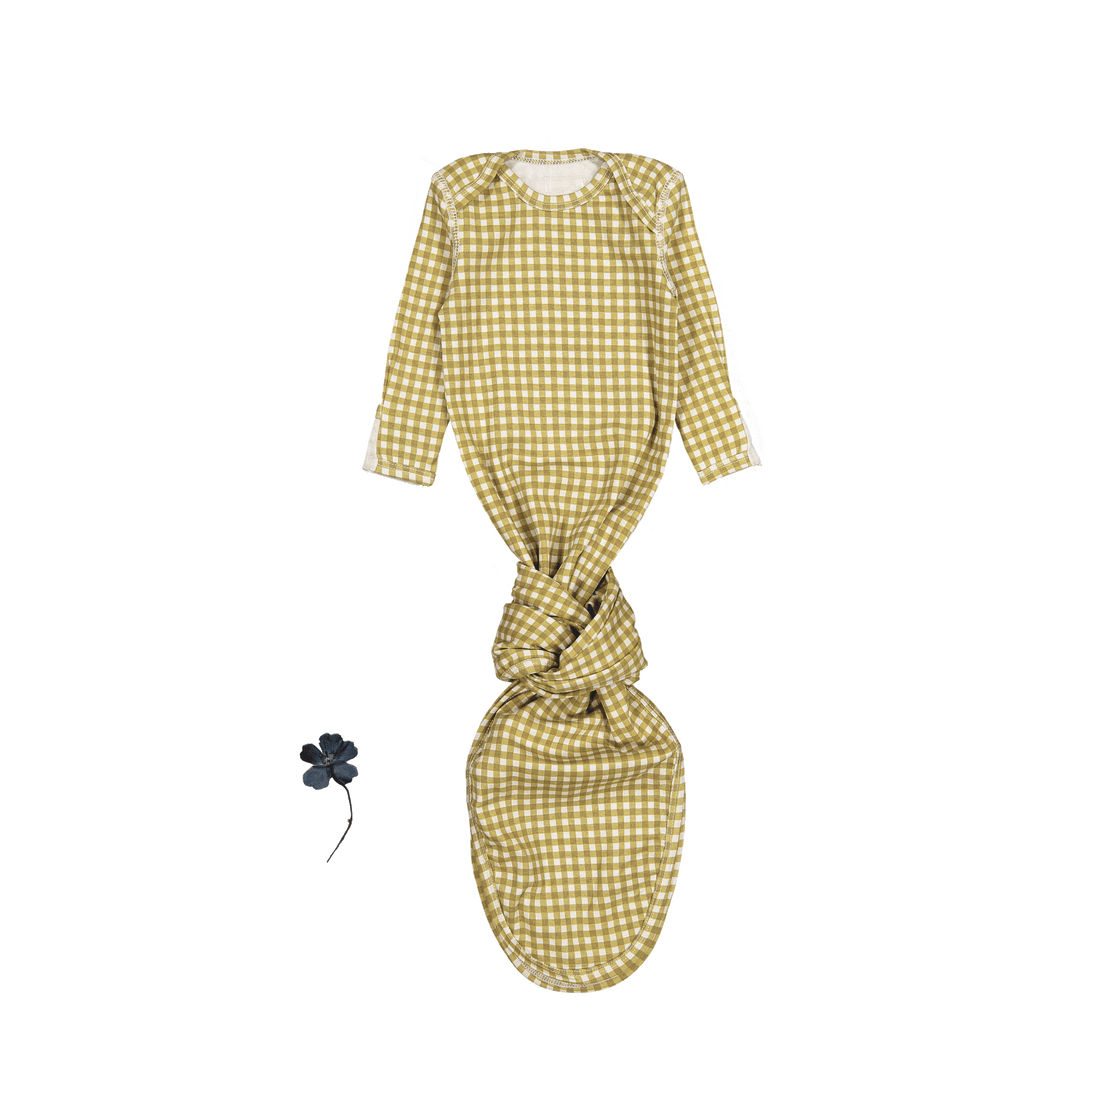 The Printed Baby Gown - Golden Gingham